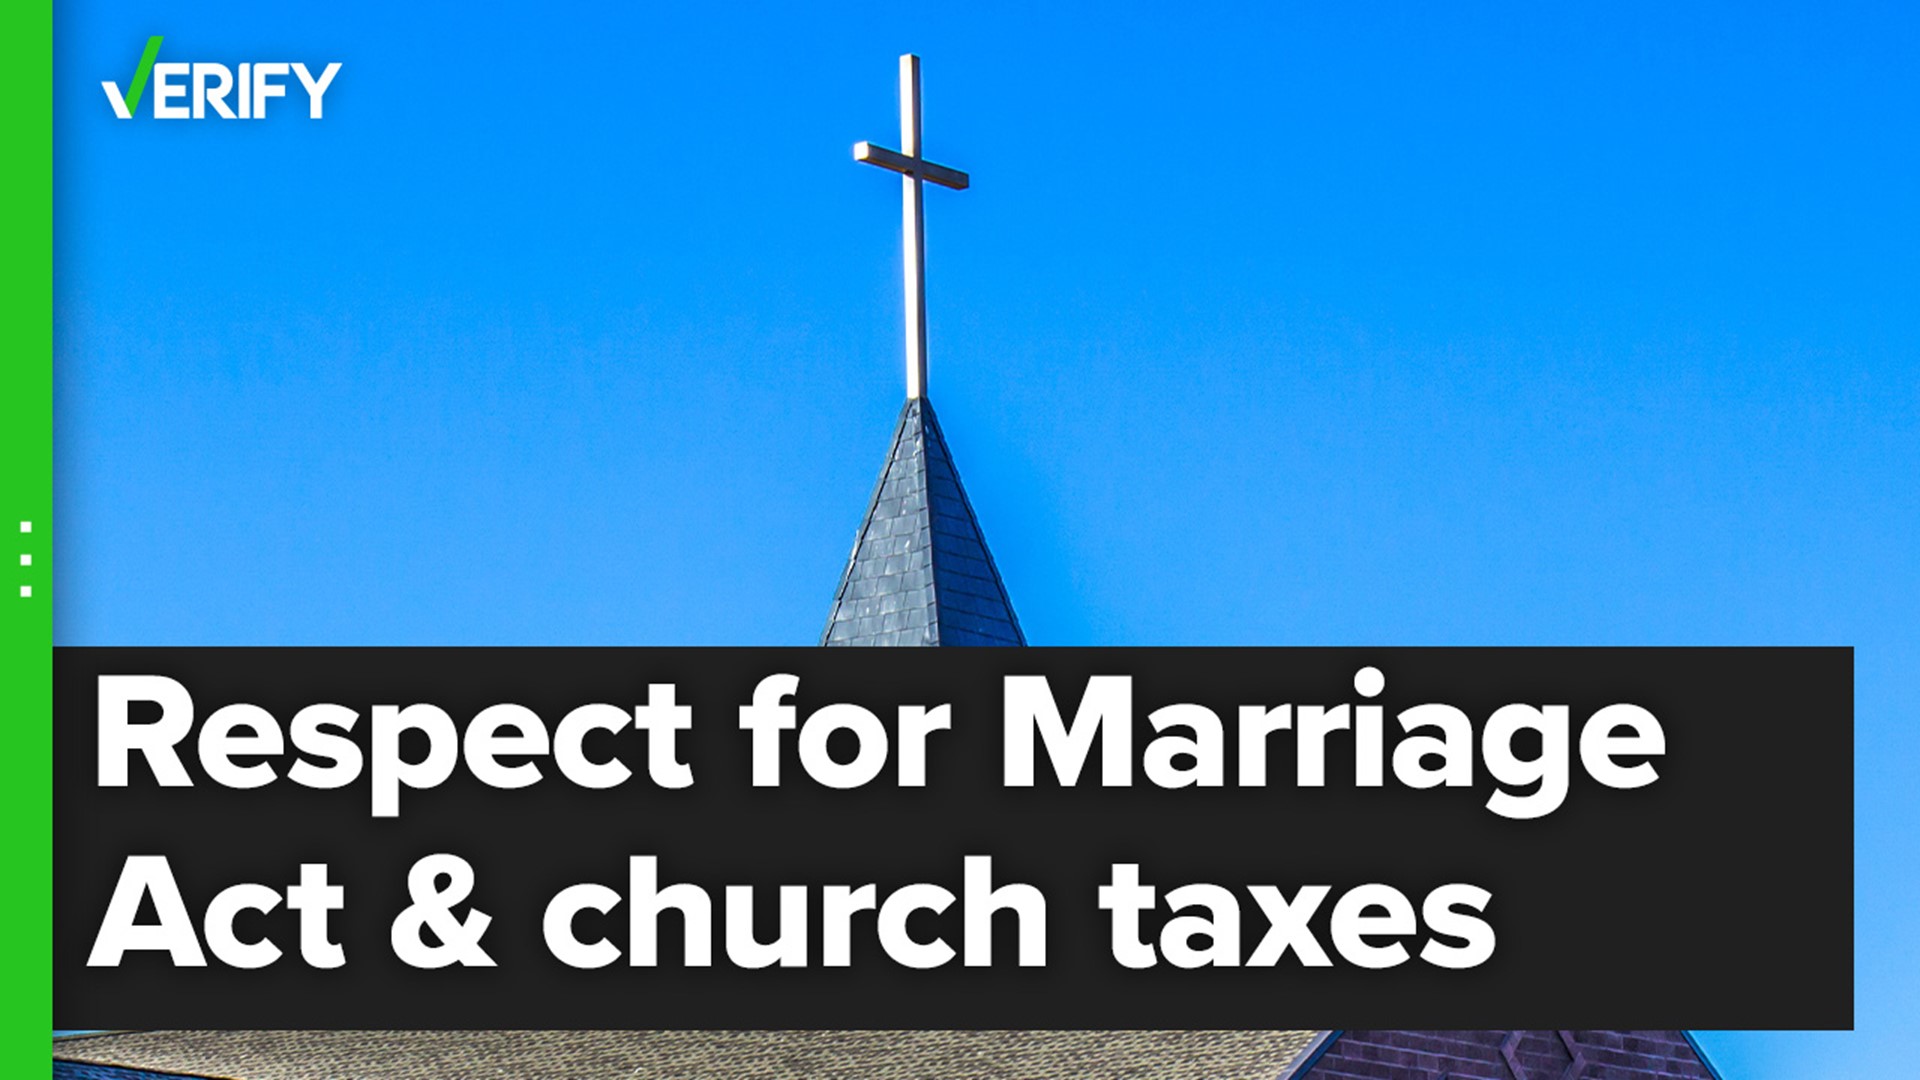 The Respect for Marriage Act explicitly says the IRS cannot revoke churches’ tax-exempt status if they don’t allow same-sex marriages, contrary to online claims.